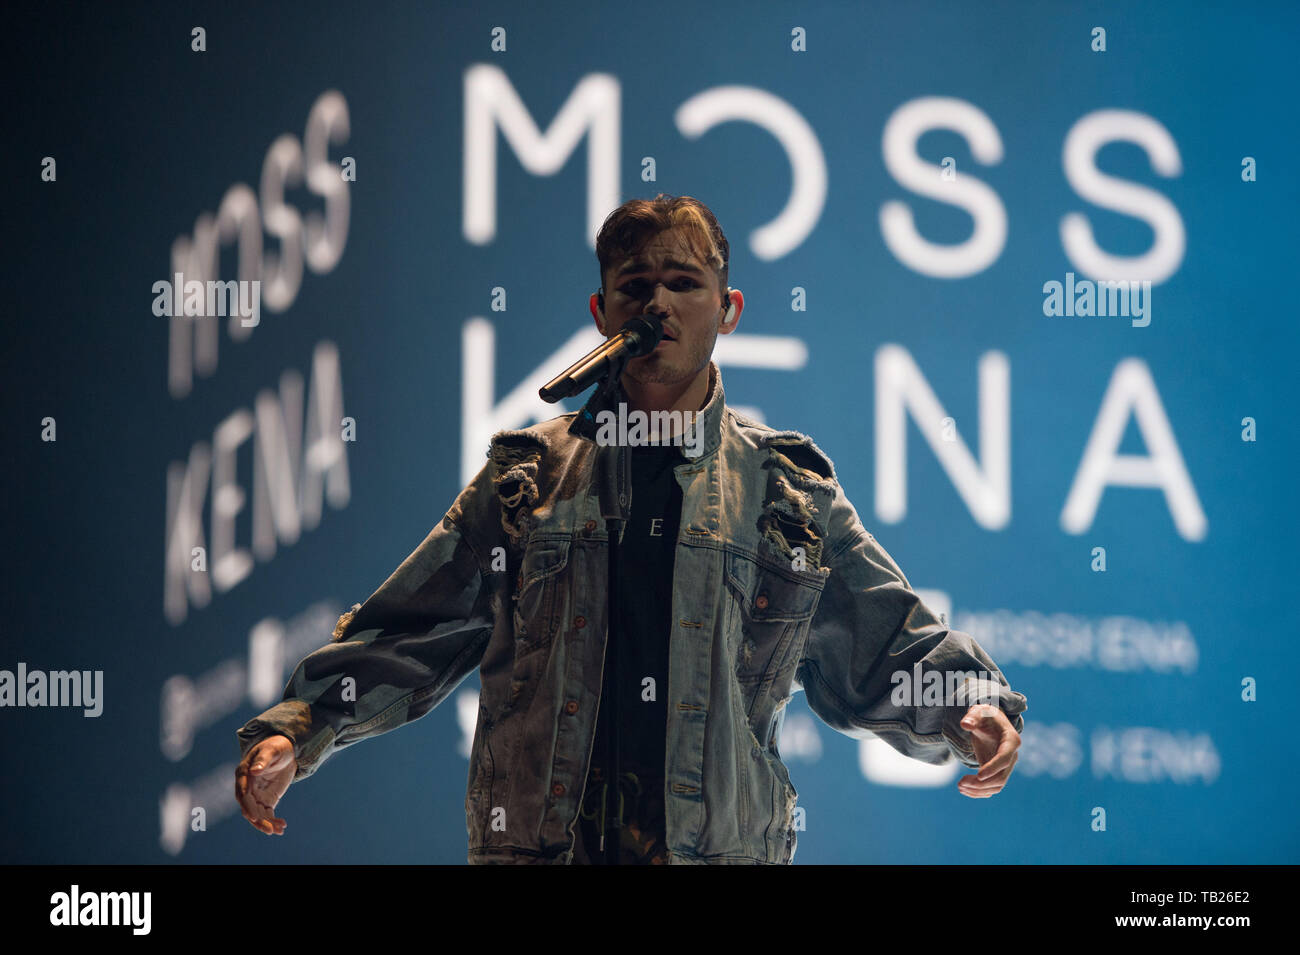 Glasgow, UK. 29 May 2019. Moss Kena in concert at SSE's Hydro Arena in Glasgow. Supporting act for Rita Ora.Credit: Colin Fisher/Alamy Live News Stock Photo